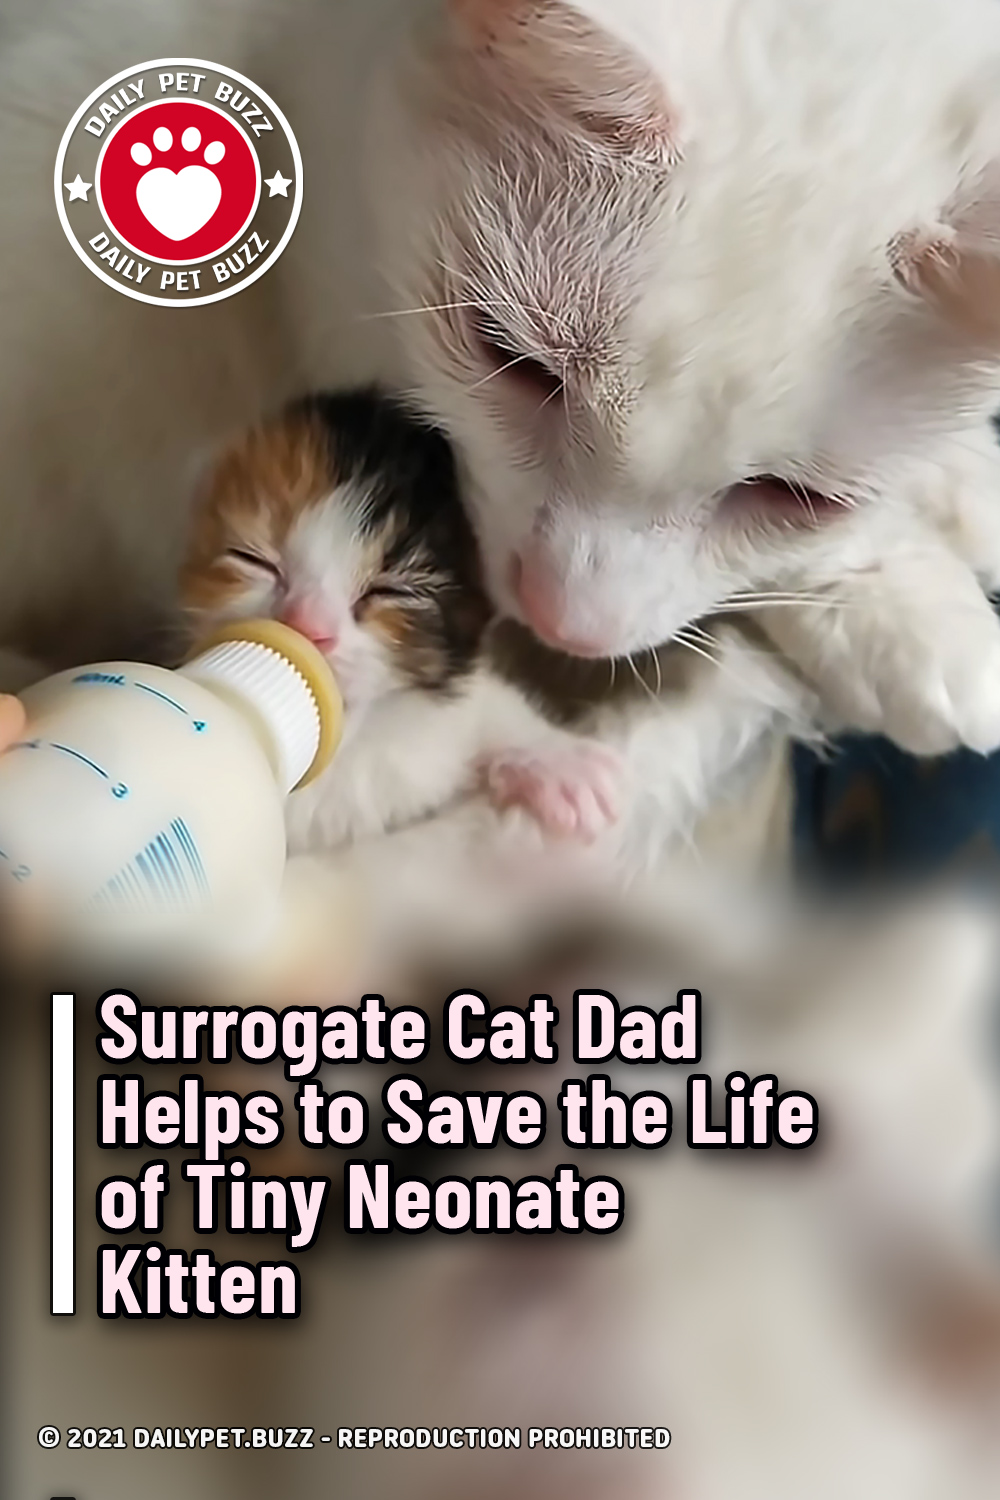 Surrogate Cat Dad Helps to Save the Life of Tiny Neonate Kitten